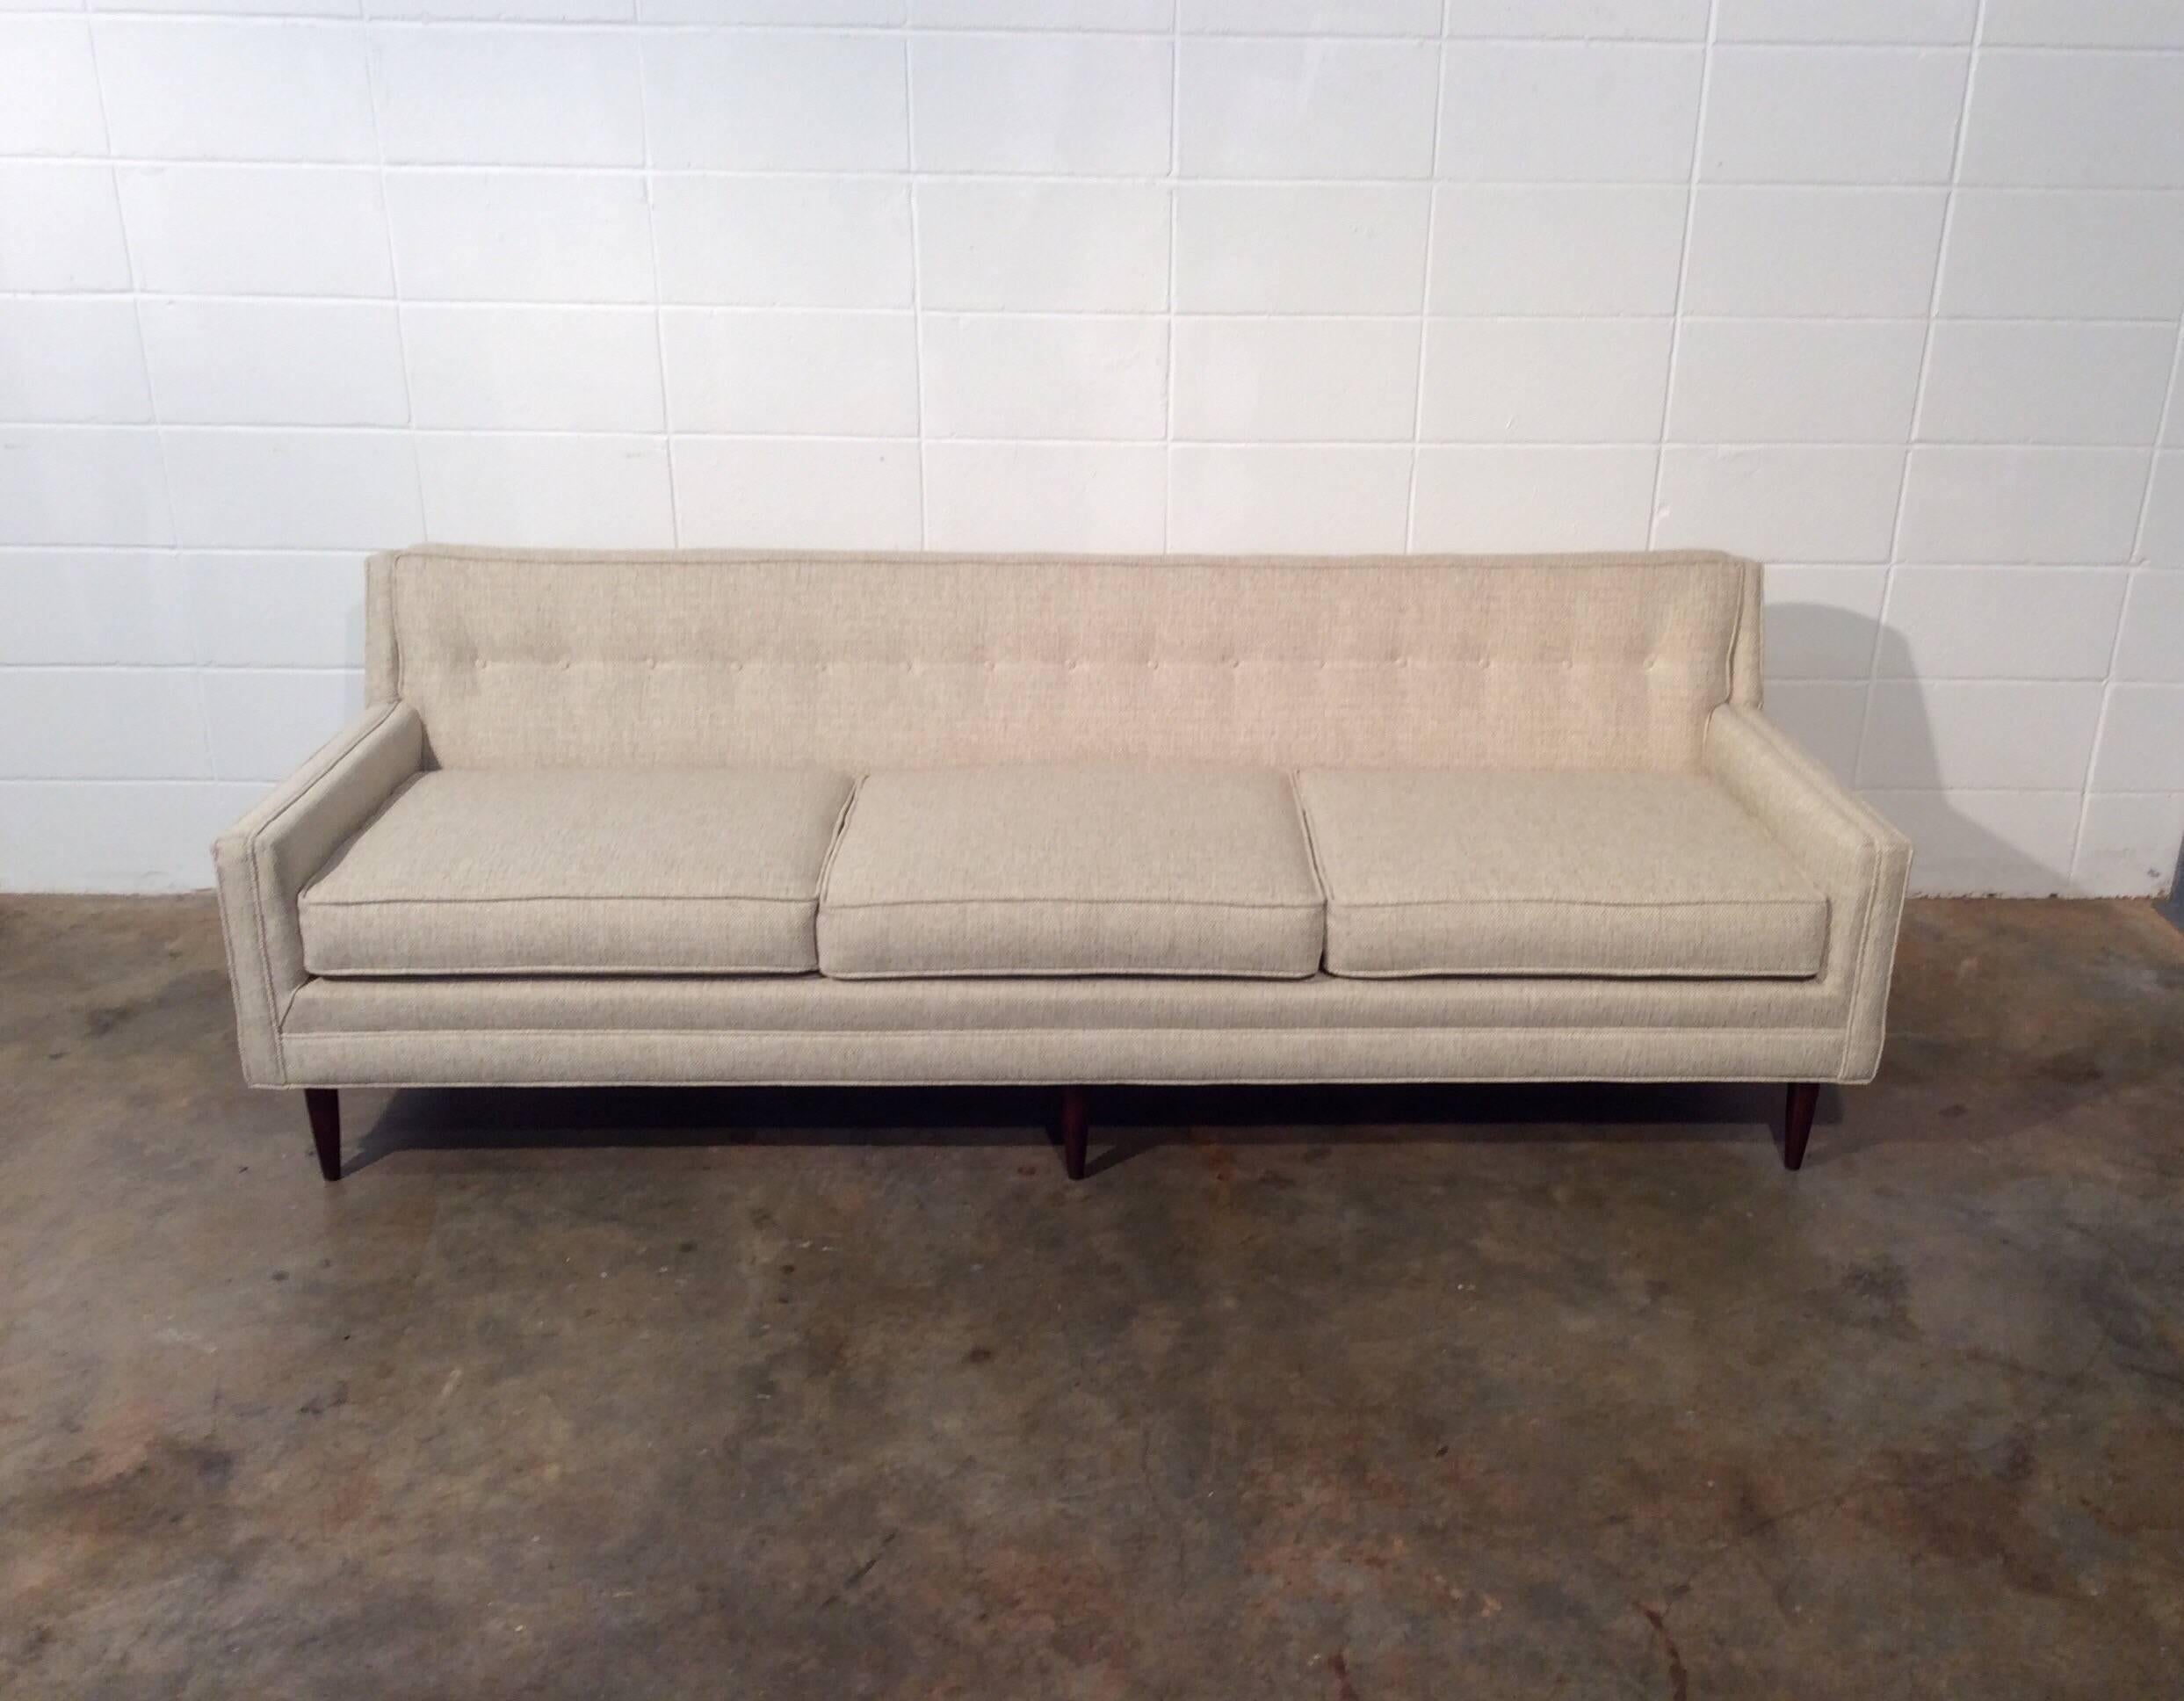 Completely restored Mid-Century Modern sofa. Restoration includes refinished legs, new foam, and new fabric. This sofa features frame mount legs (very sturdy), clean angular lines, new neutral revolution fabric. Excellent piece.
No known issues